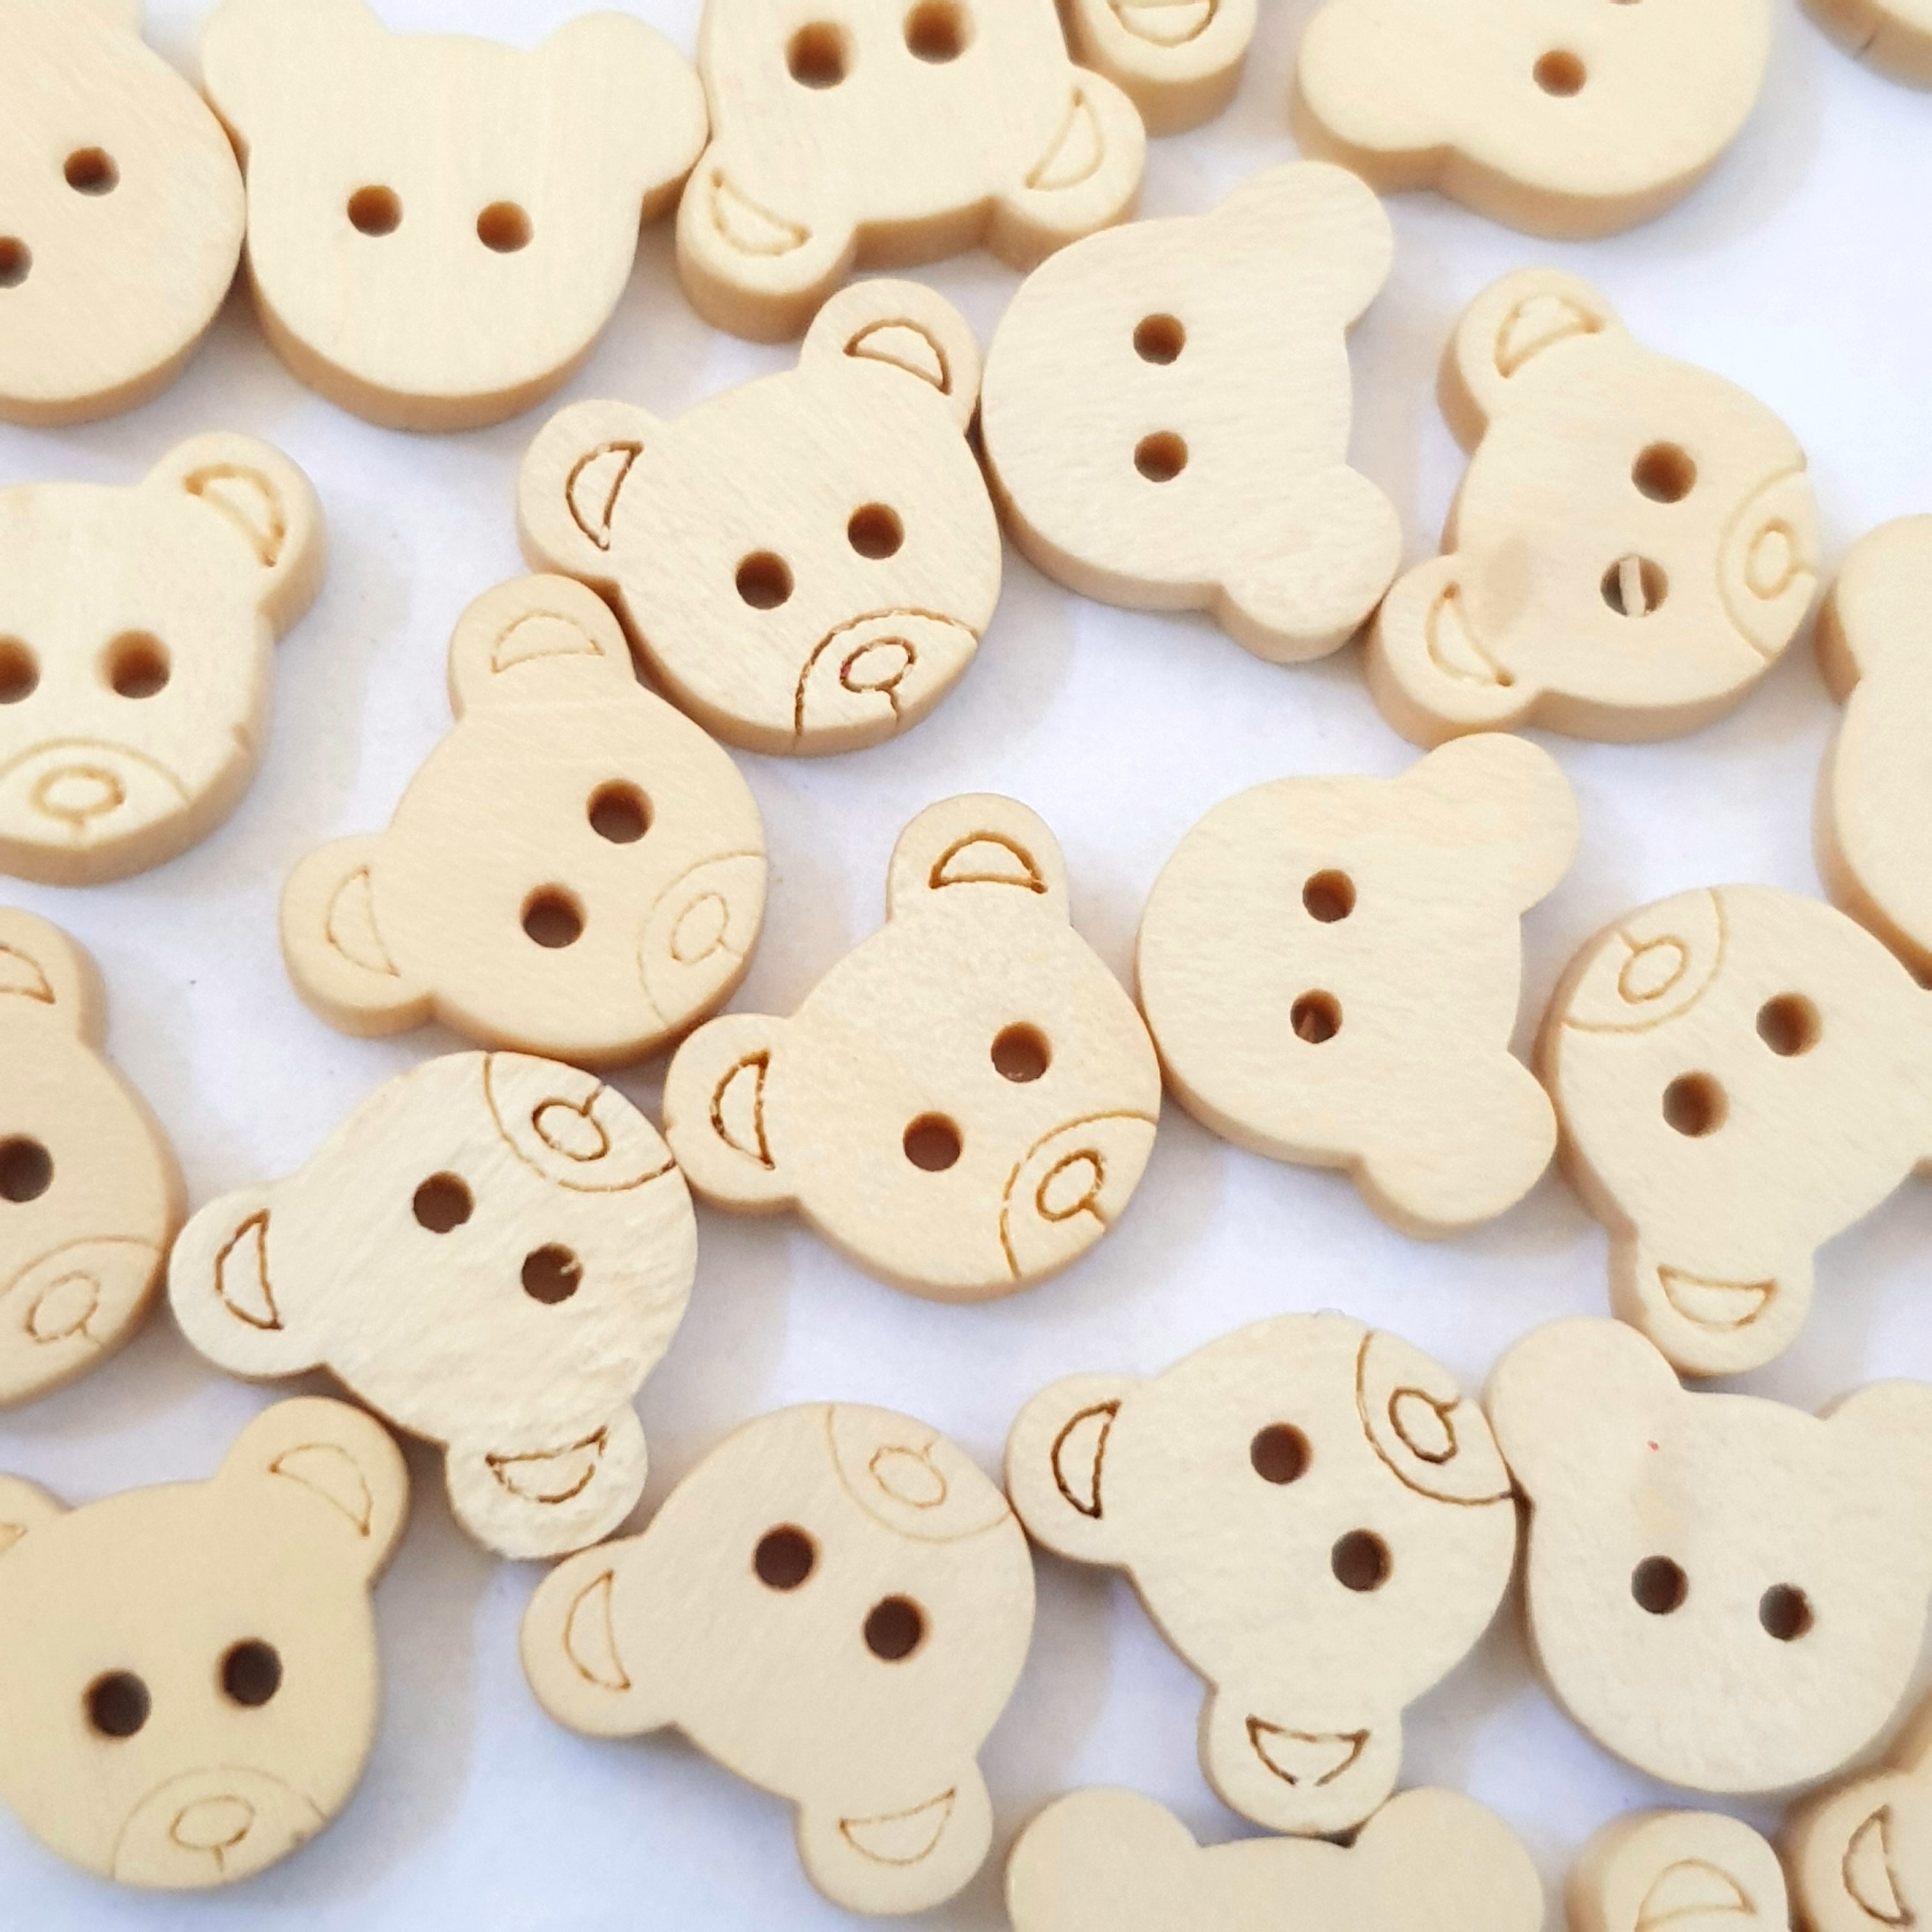 MajorCrafts 48pcs 13mm Teddy Bear Light Brown 2 Holes Small Sewing Wooden Buttons